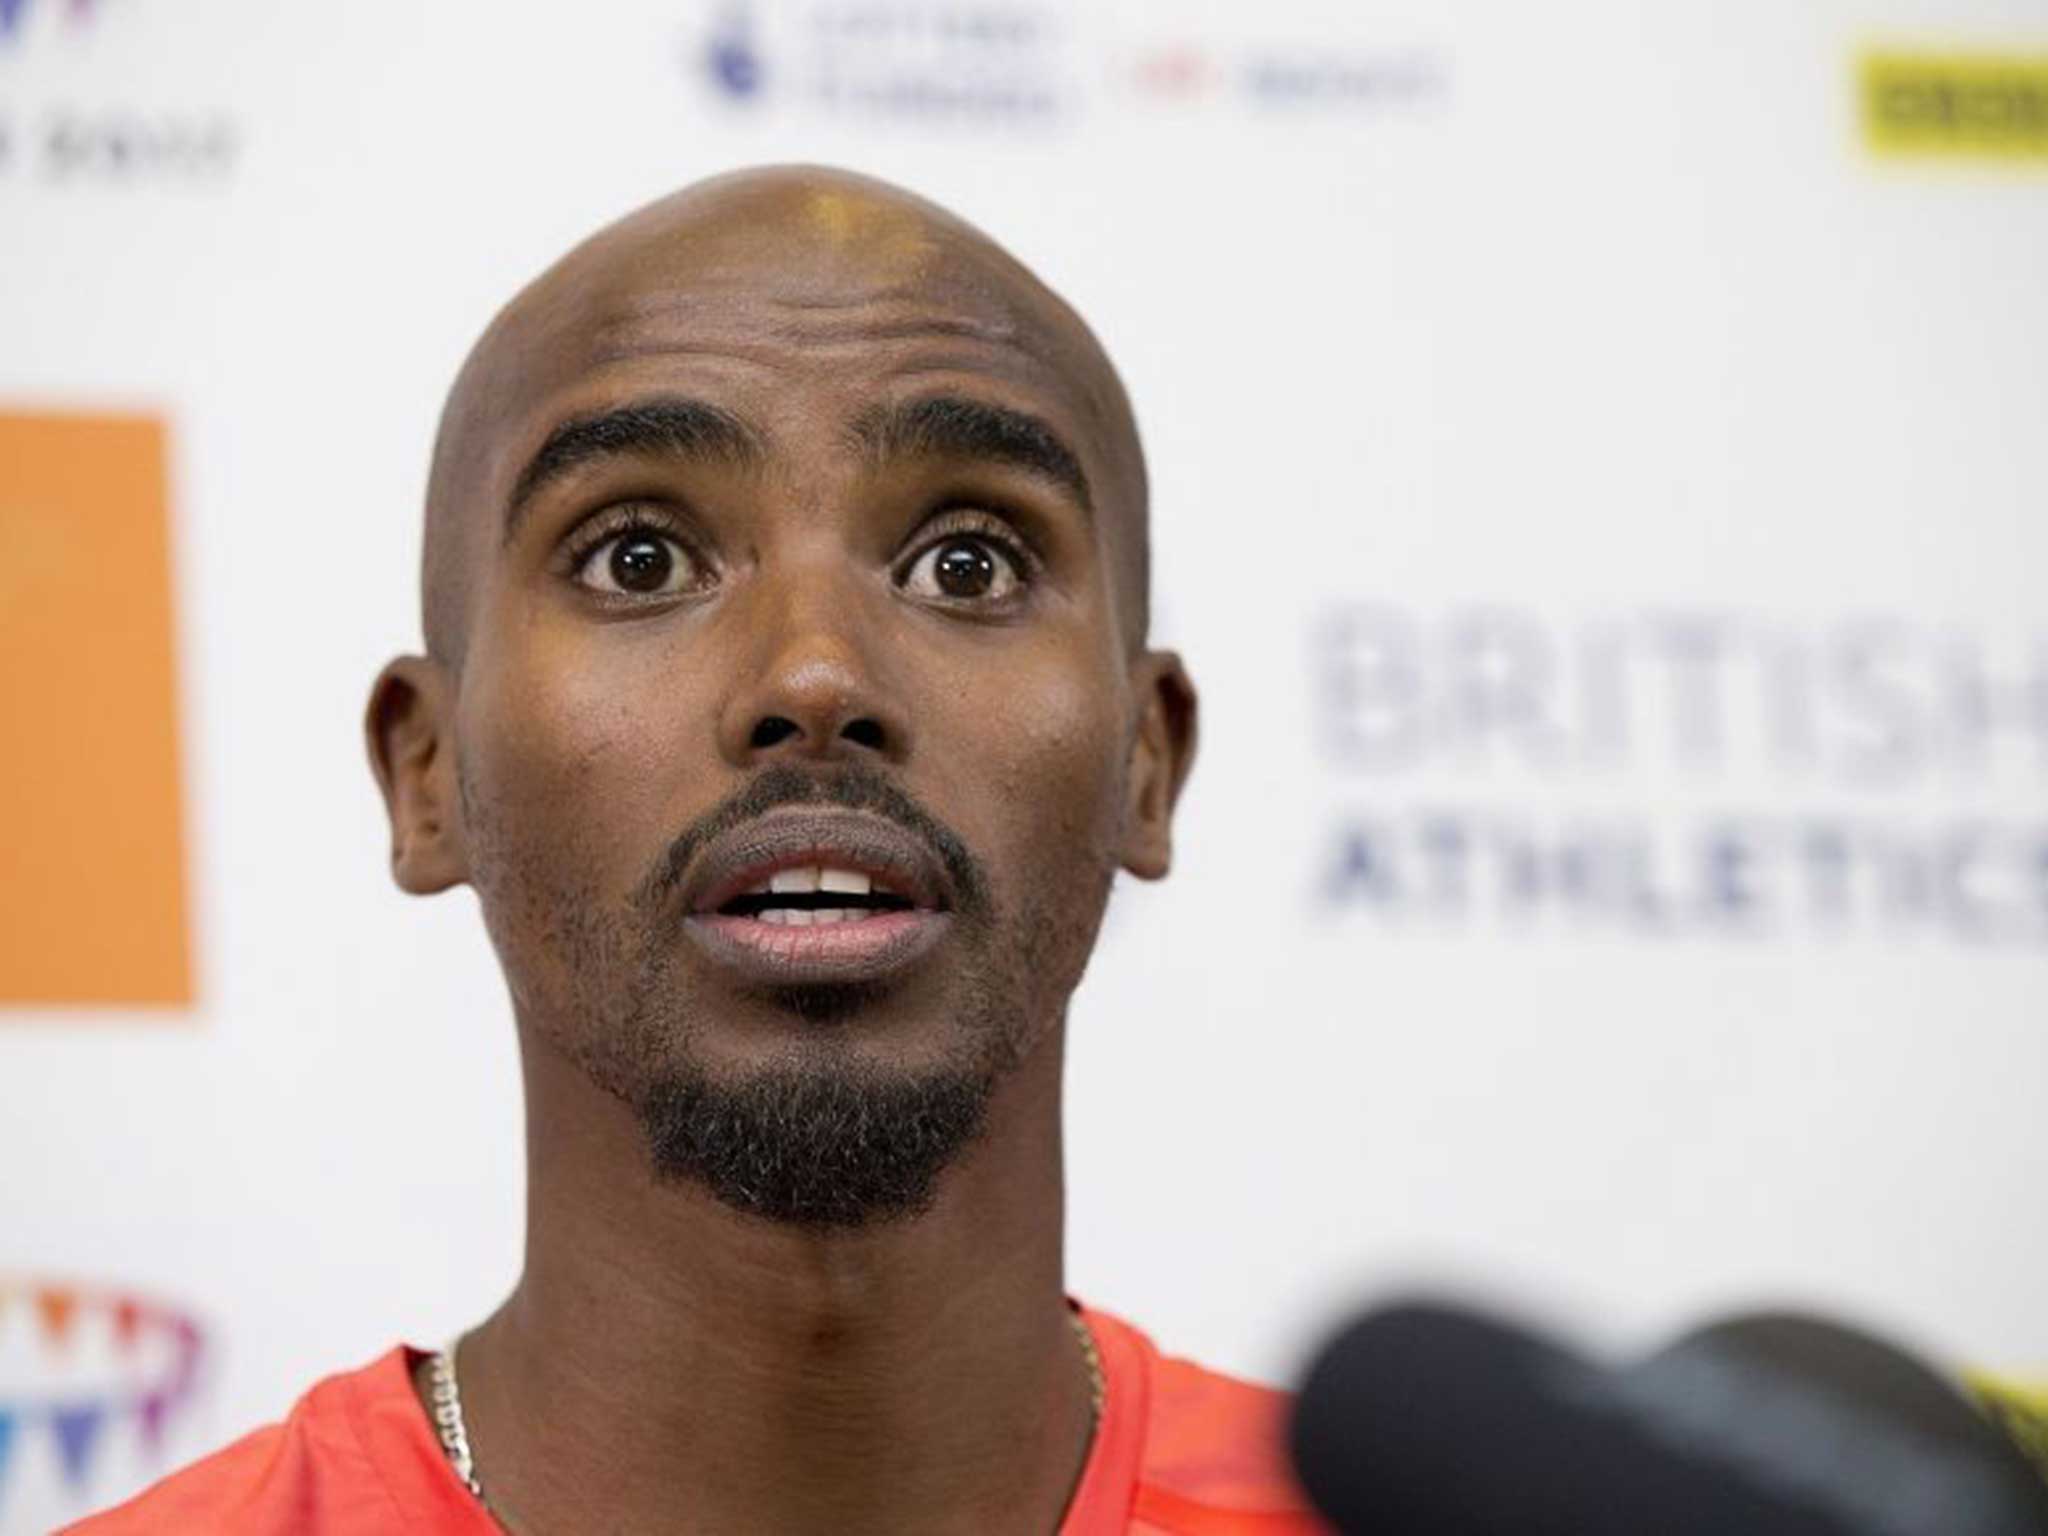 Mo Farah has said he will stand by his coach until he gets further information (PA)